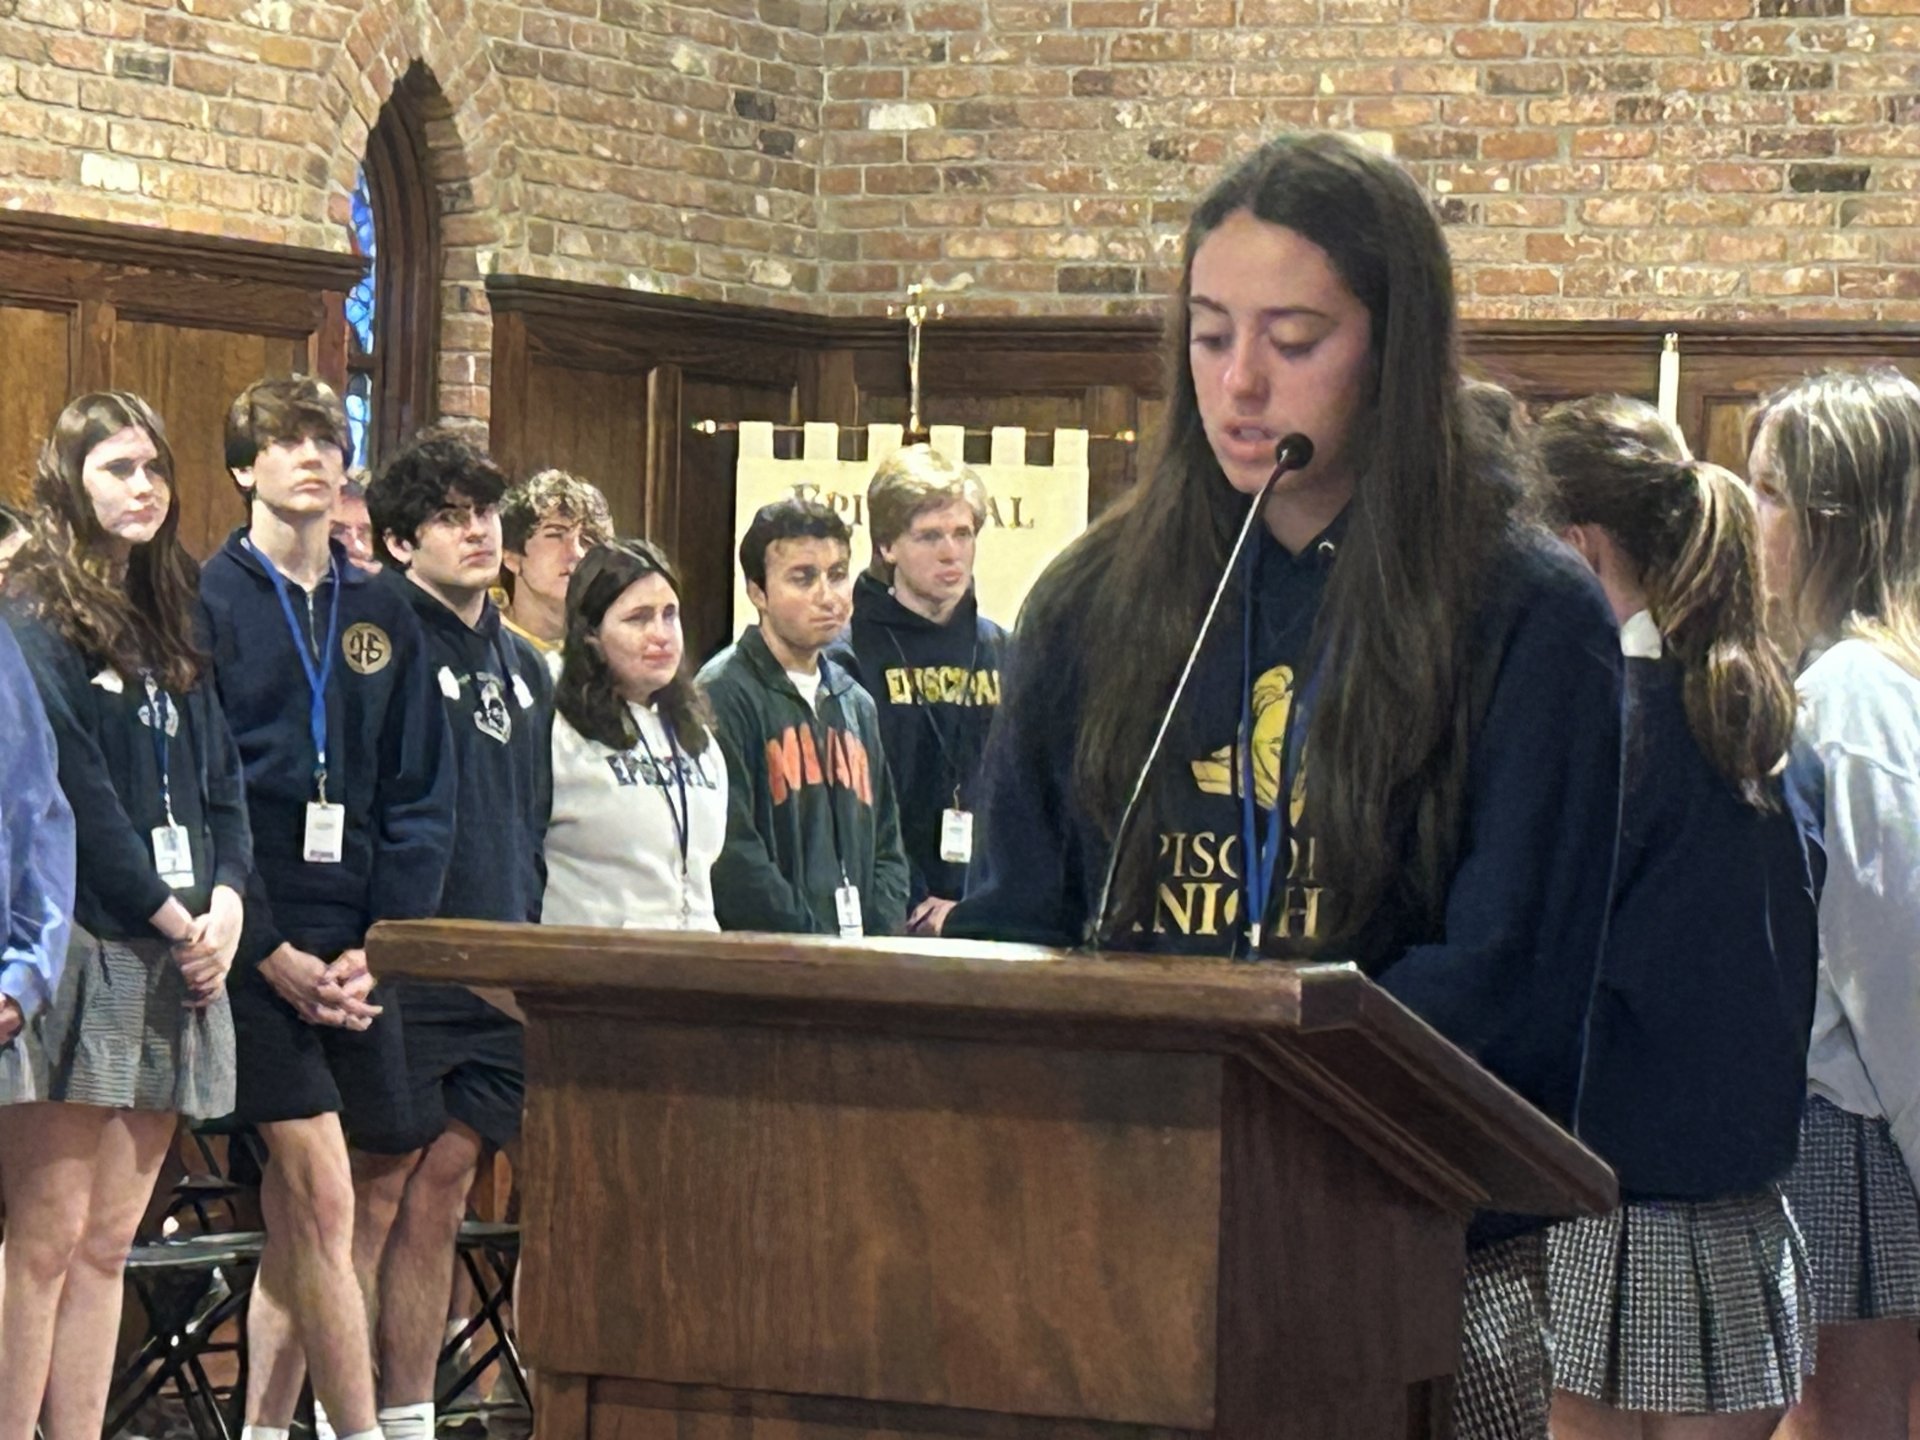 Student leading prayers in chapel